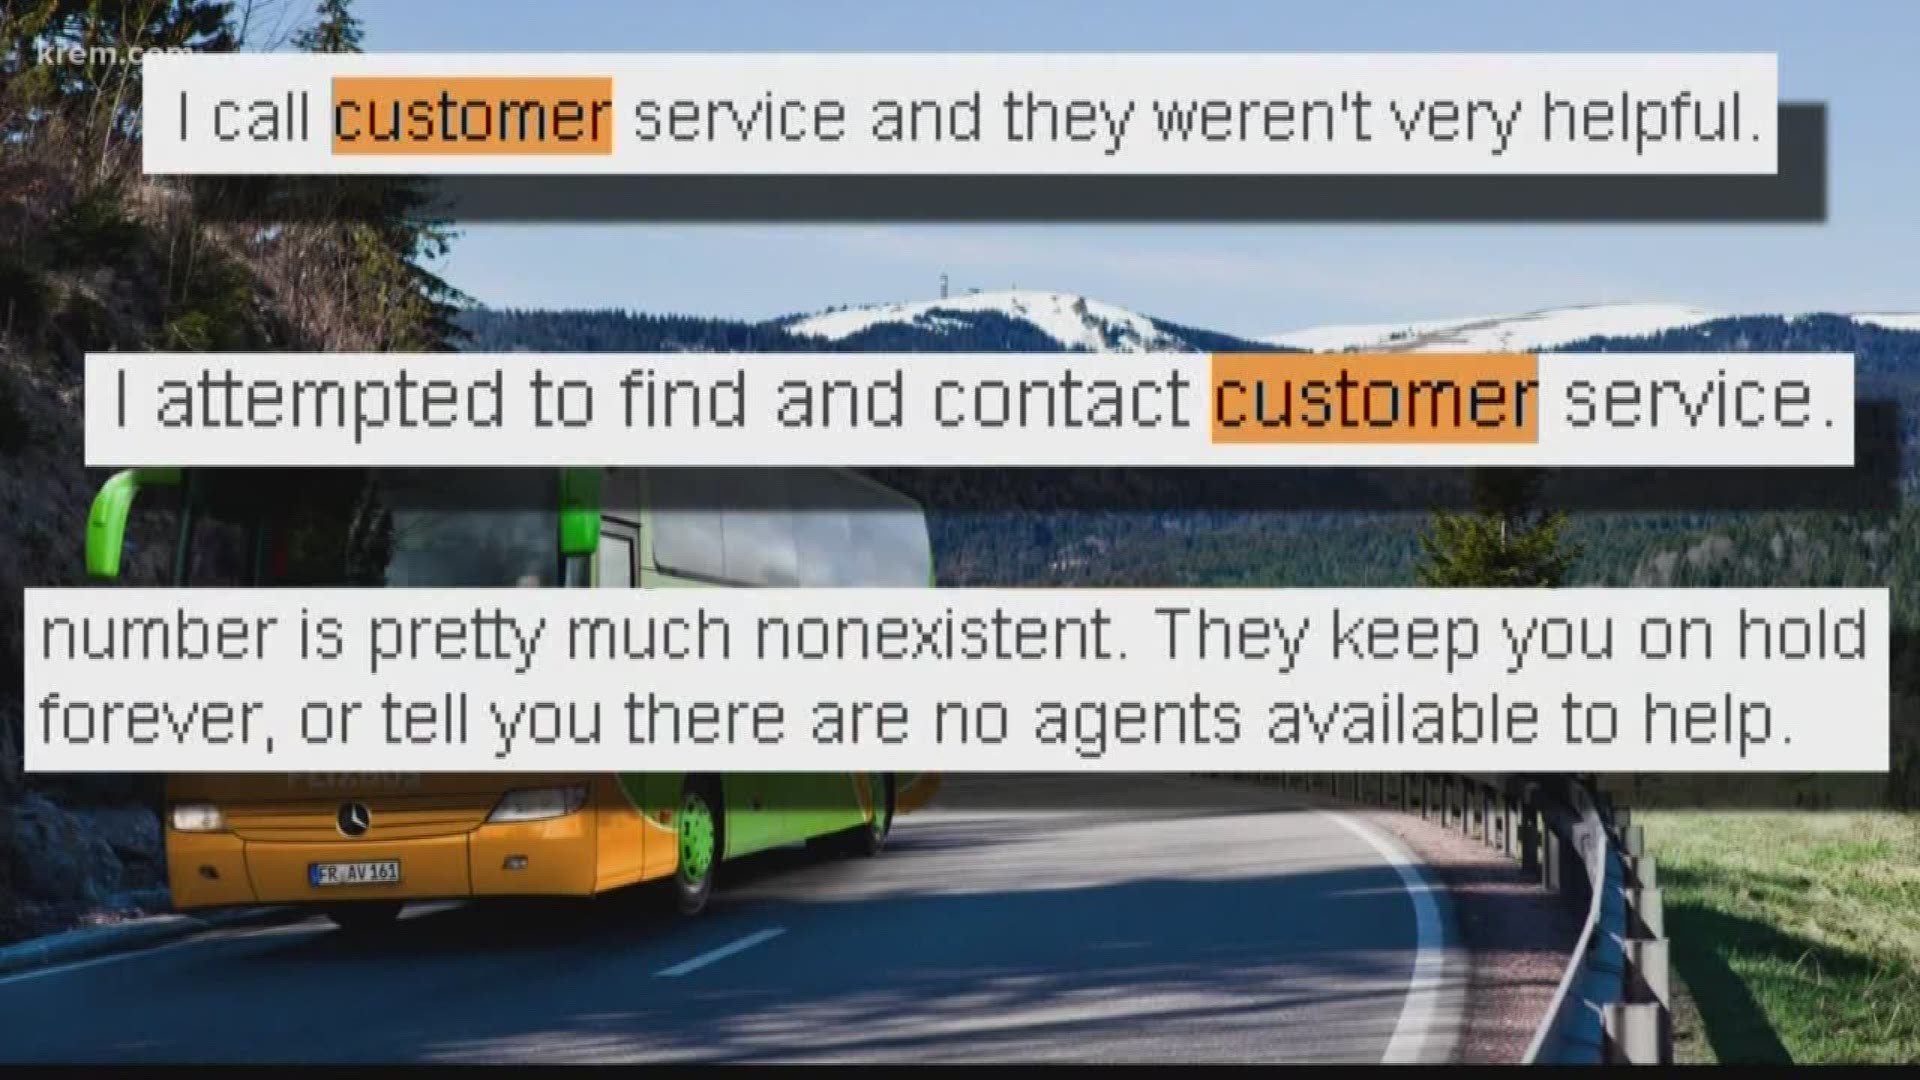 Flixbus is offering rides from Spokane to Seattle starting at just $10. But some customers are complaining about the company's customer service.